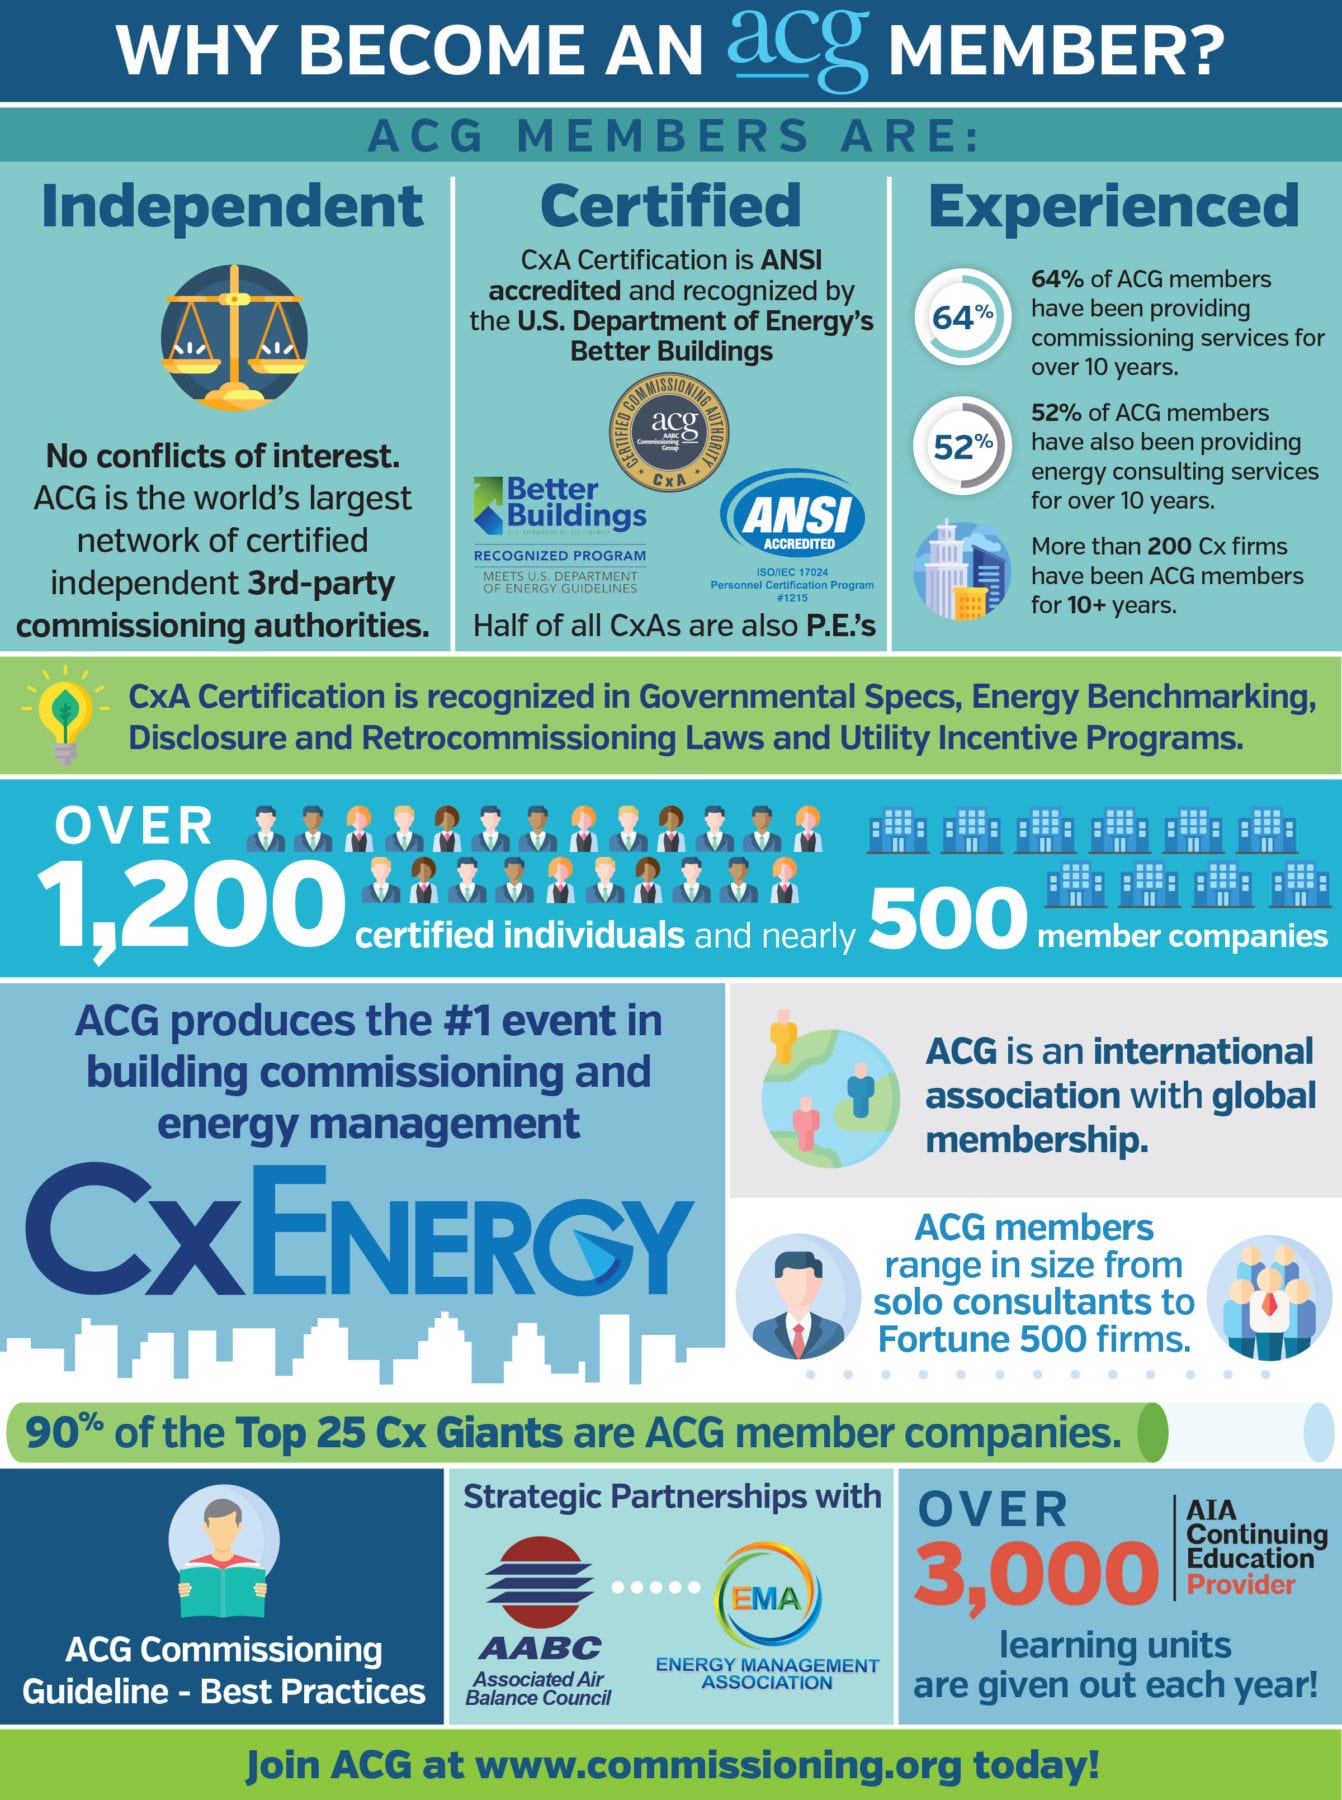 Why become an ACG member?